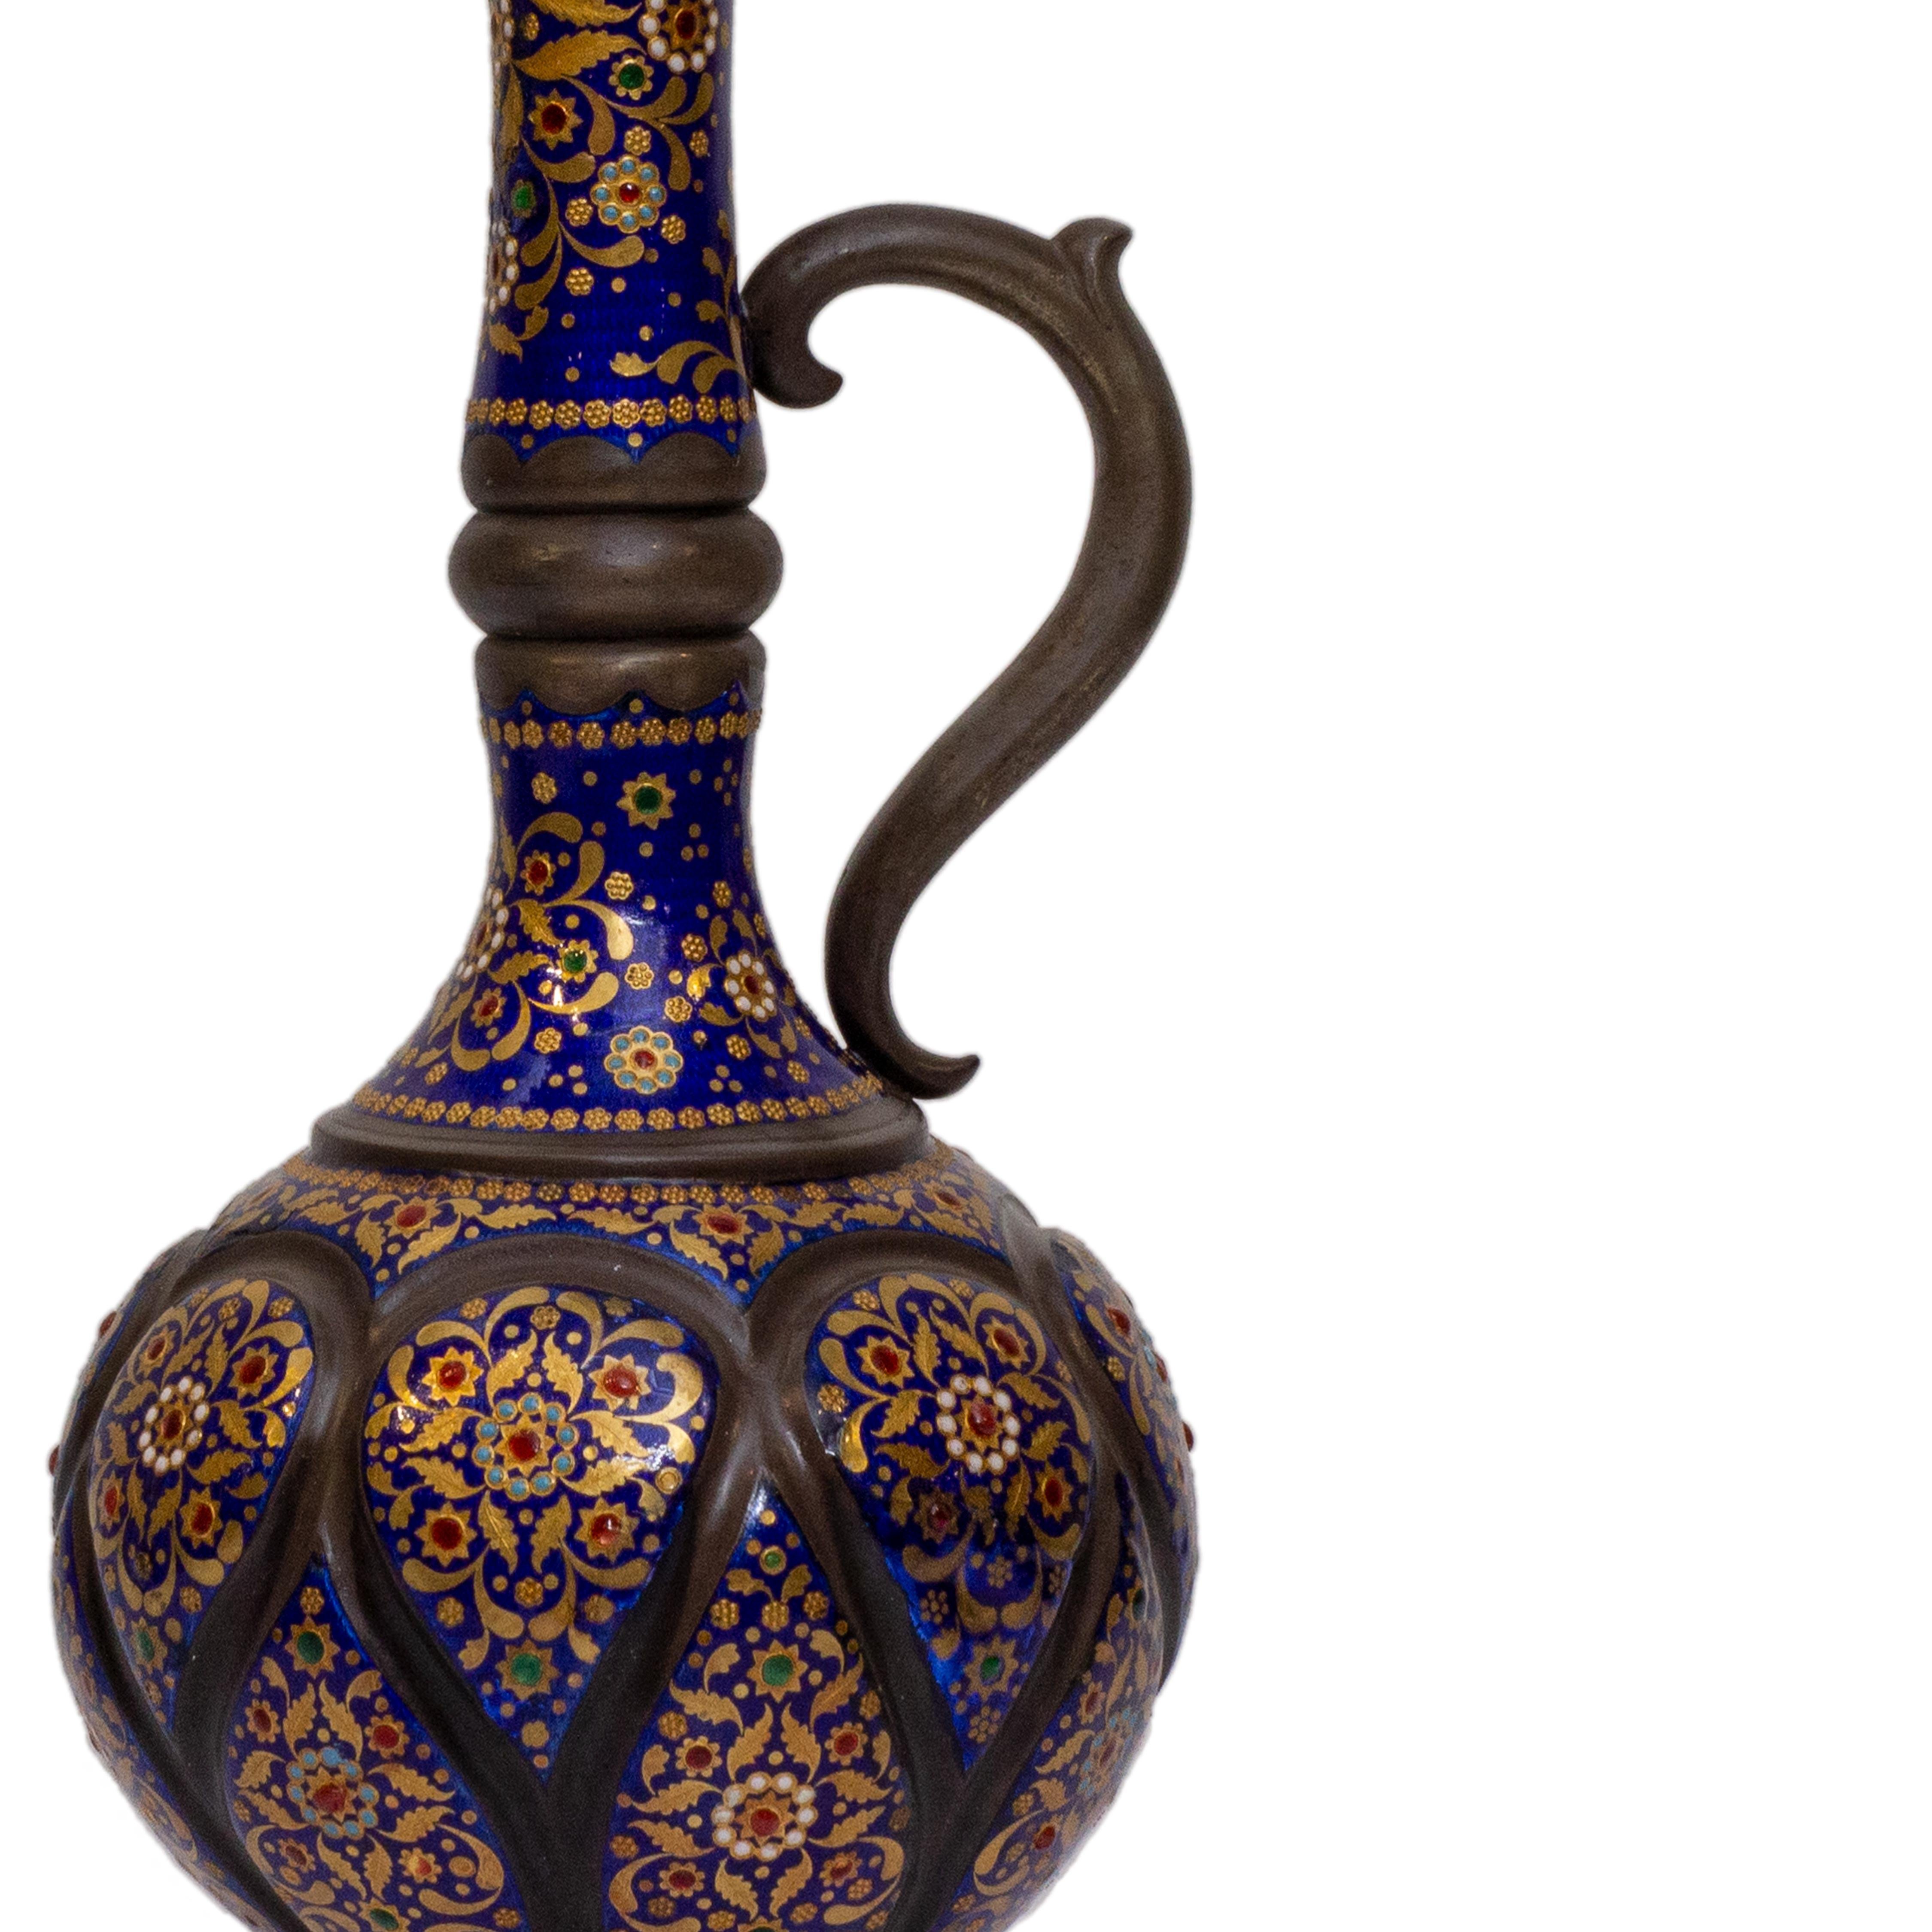 Islamic market enameled silver ewer, circa second half of 19th century. Beautifully enameled on high grade hand hammered silver. Measure: 11.25